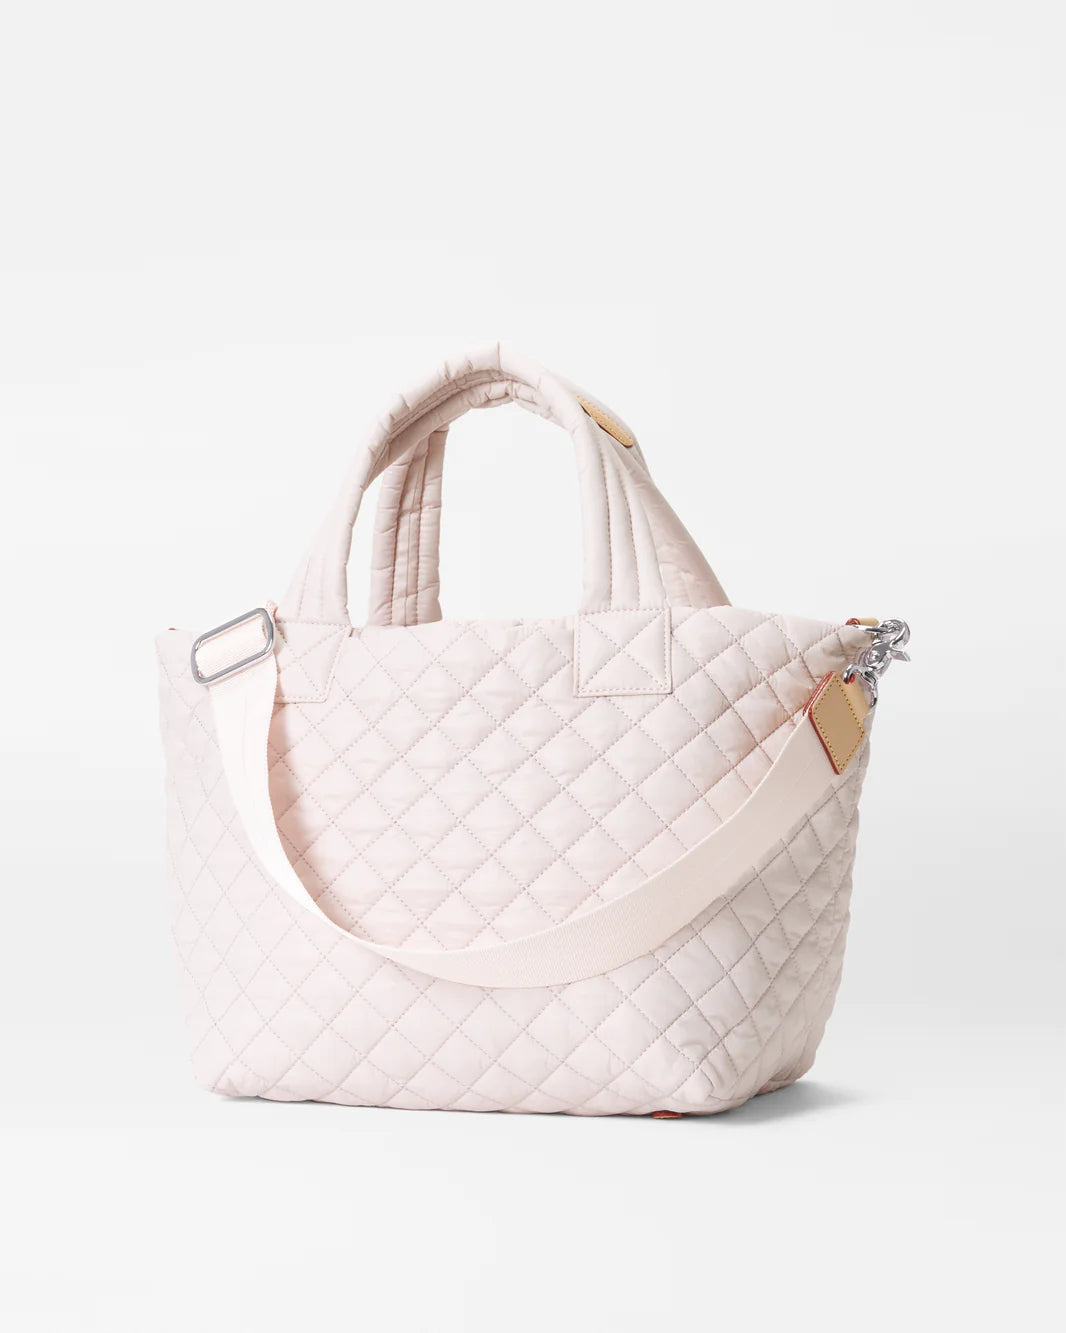 MZ WALLACE SMALL METRO TOTE DELUXE IN ROSE